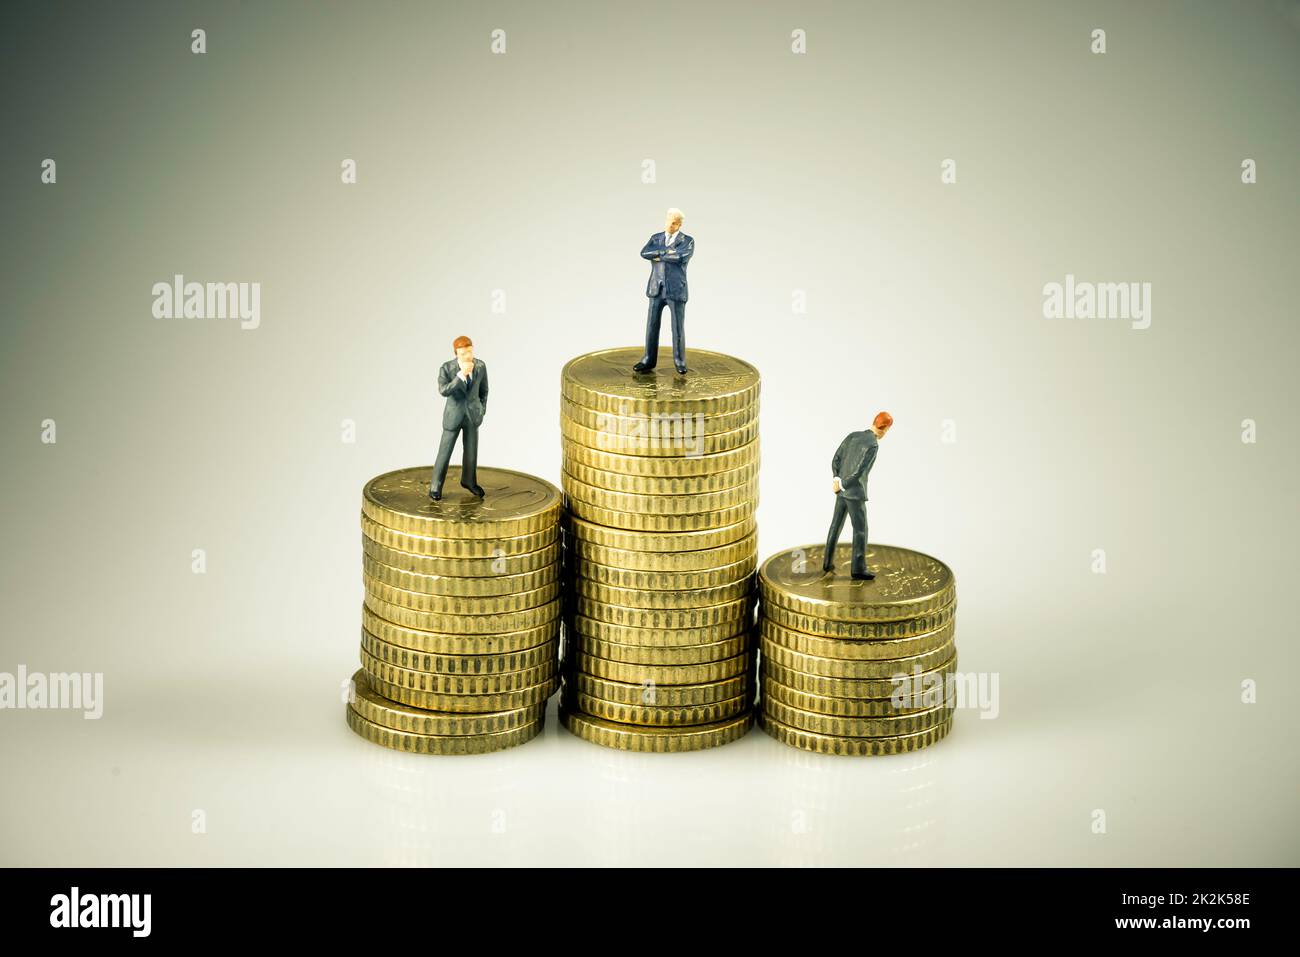 Business people on pile of coins. Business competition concept Stock Photo